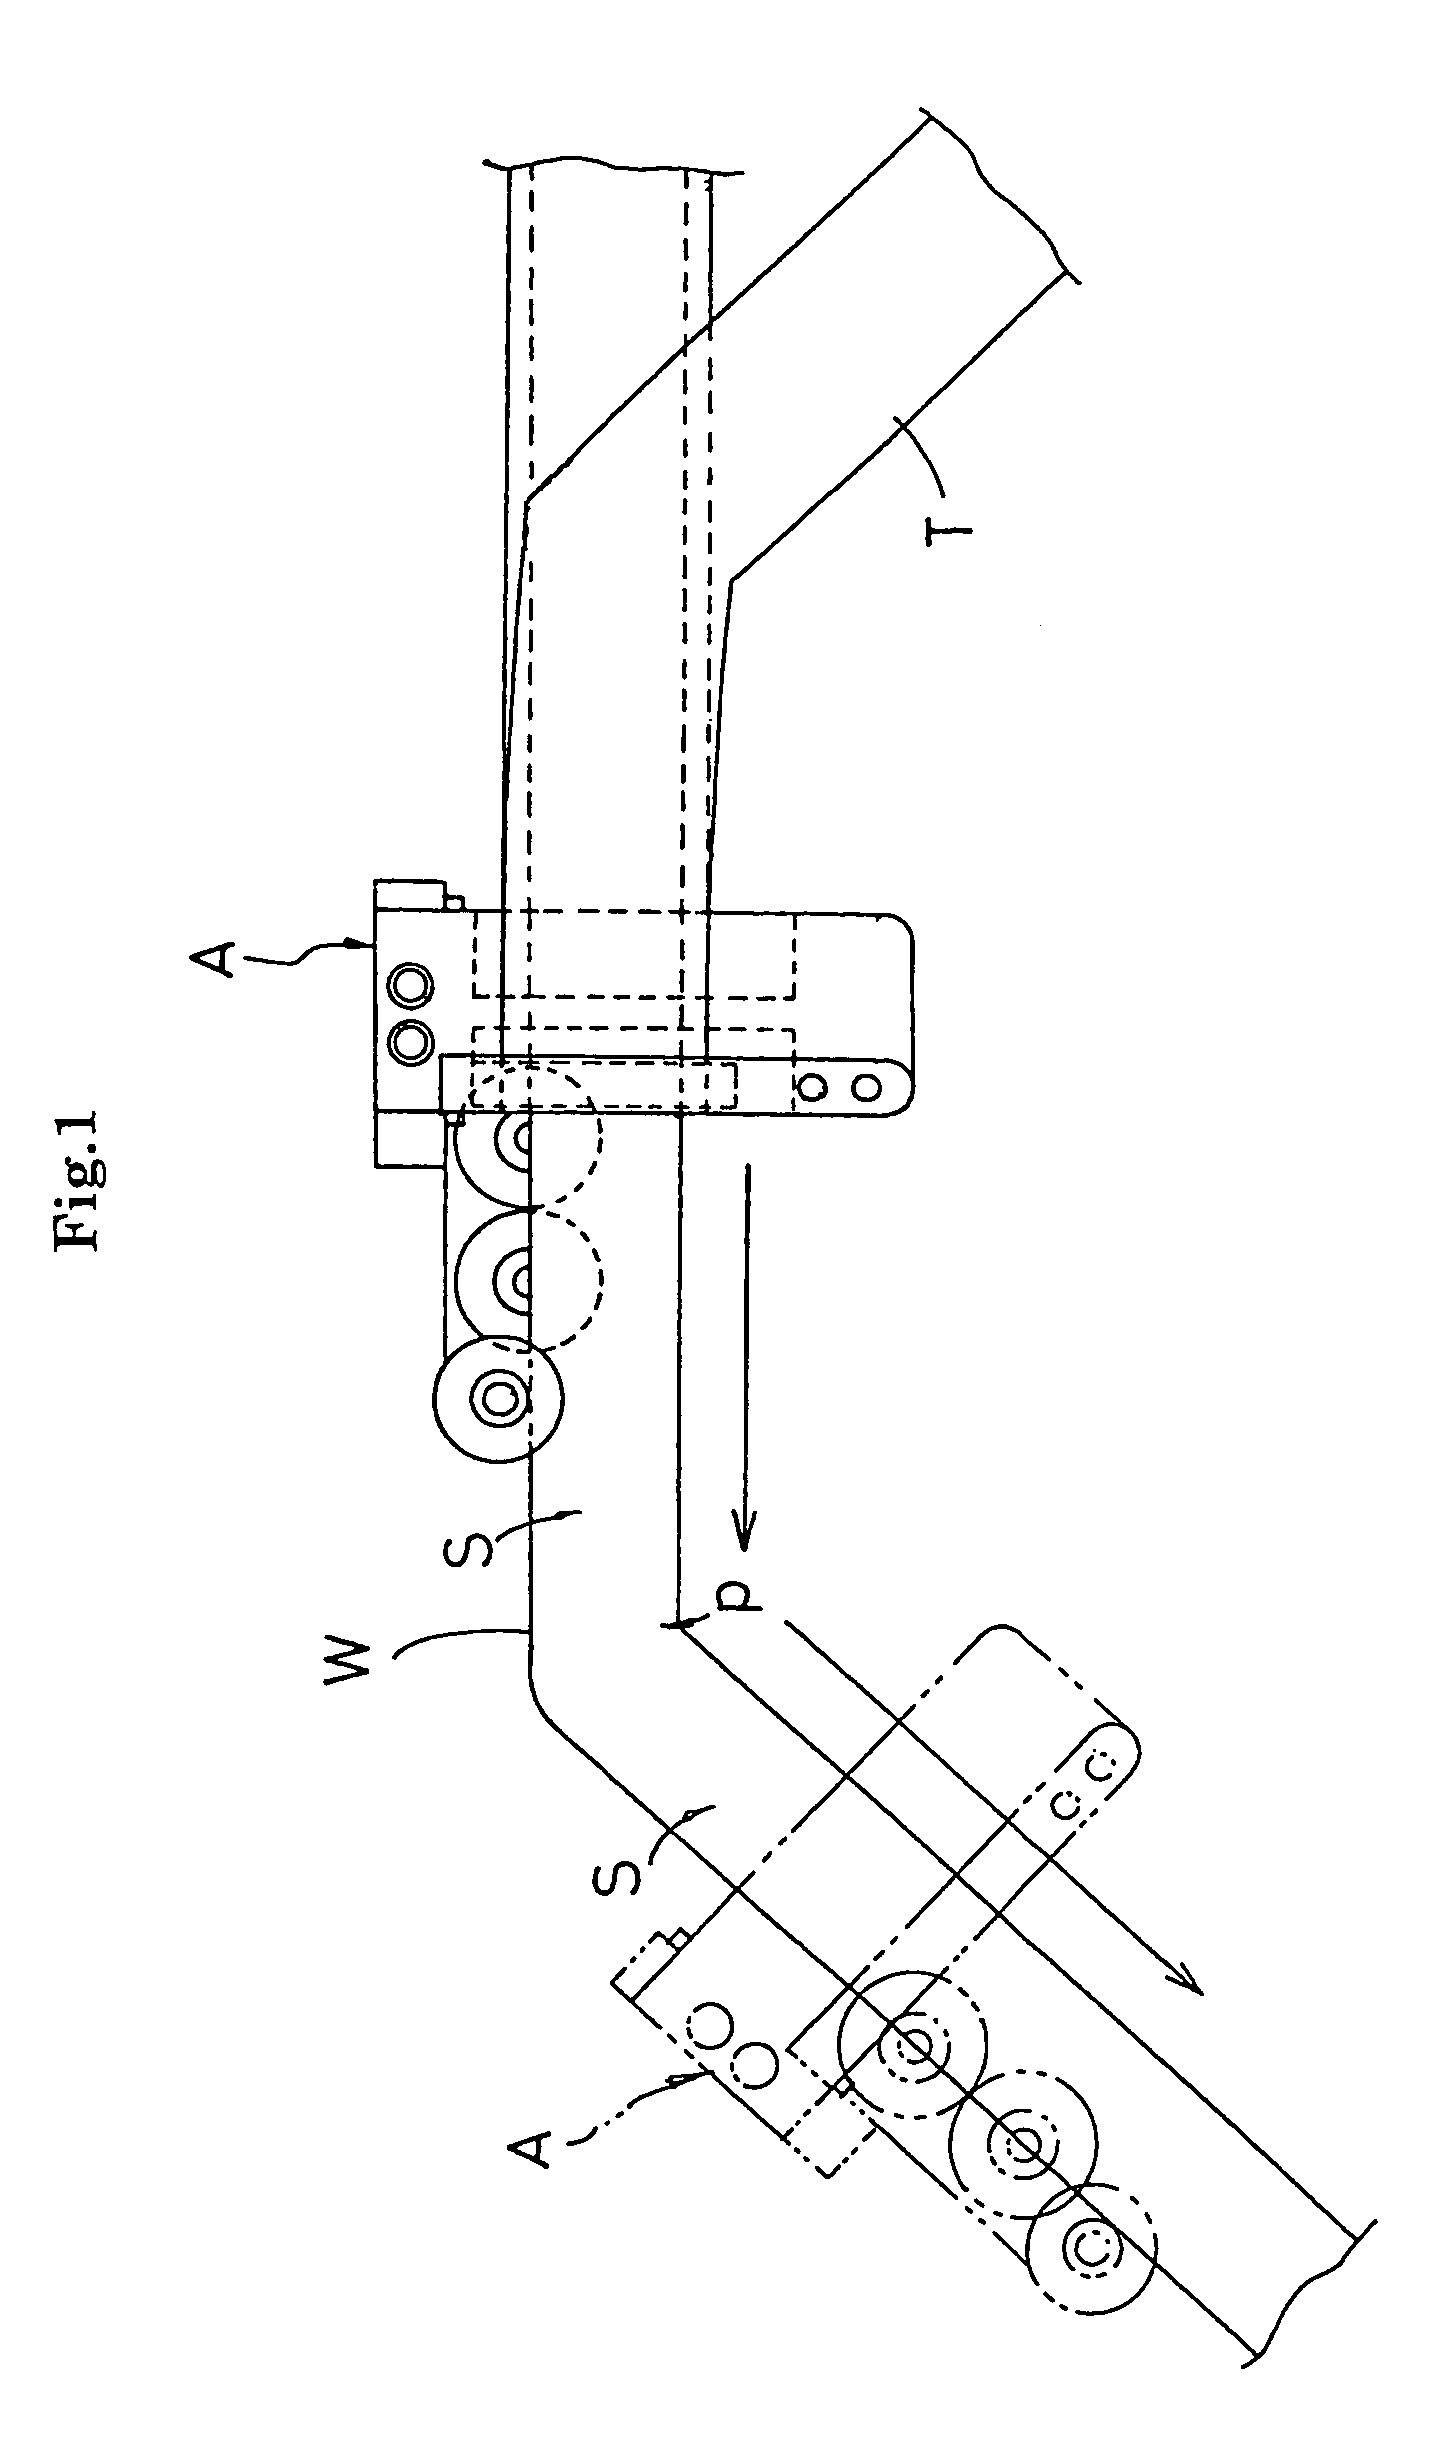 Method and apparatus for joining adhesive tape